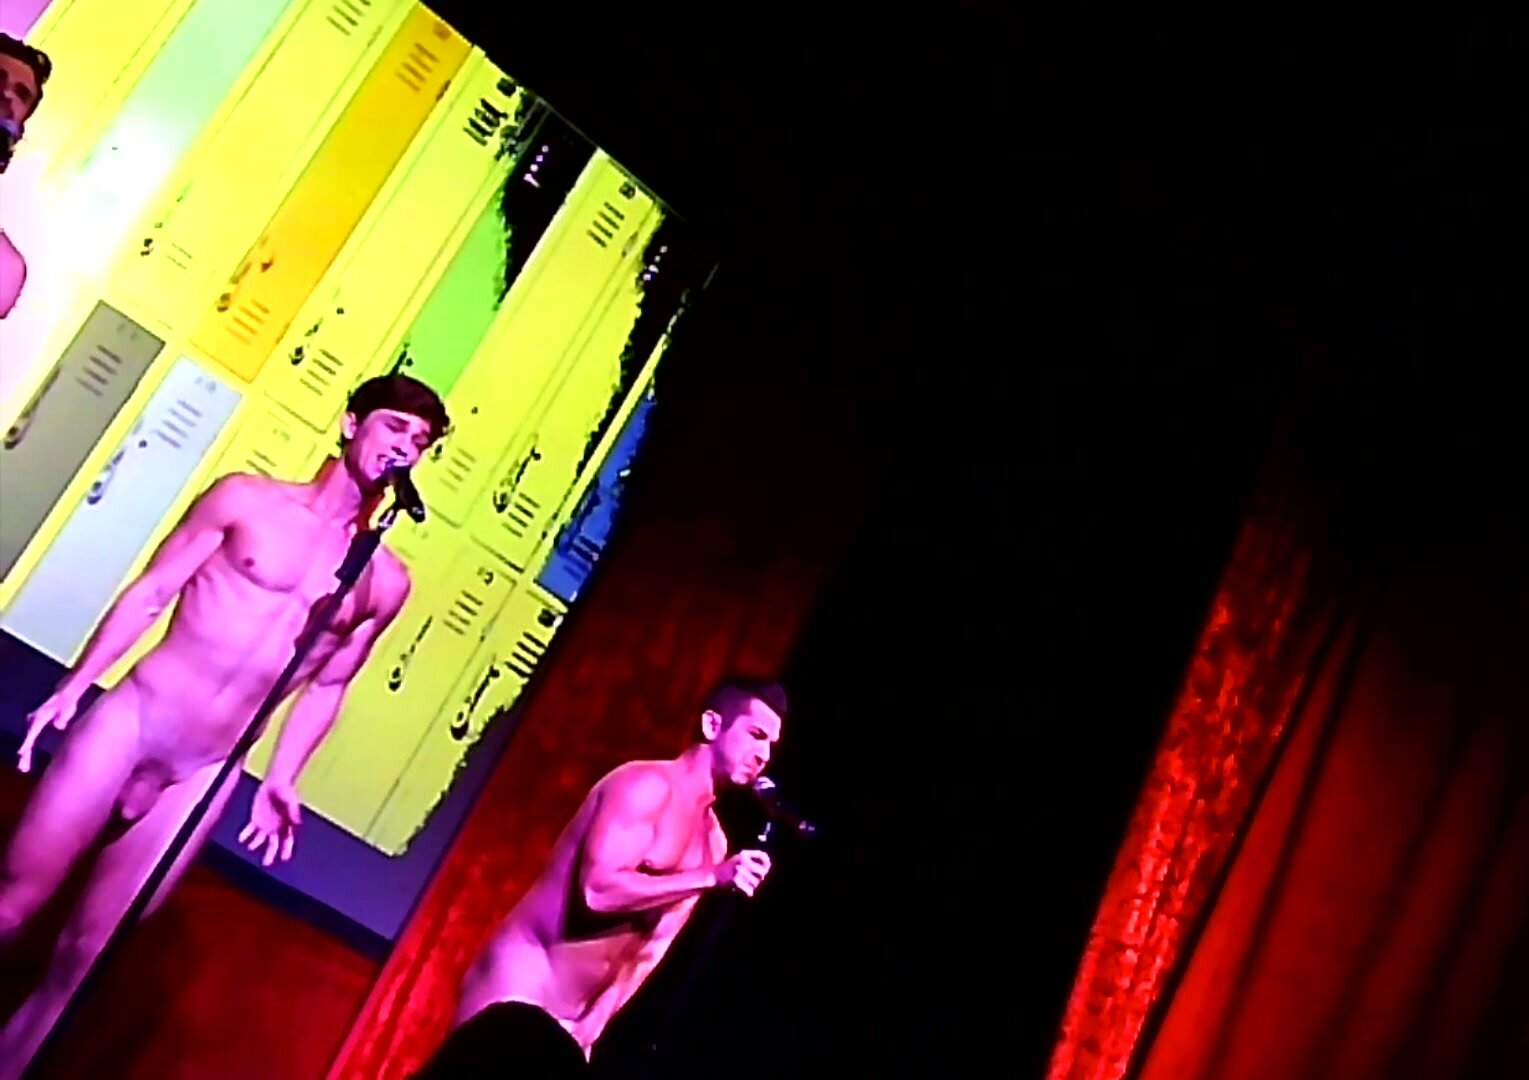 Exhibition Hot Guys Perform Nude On Stage